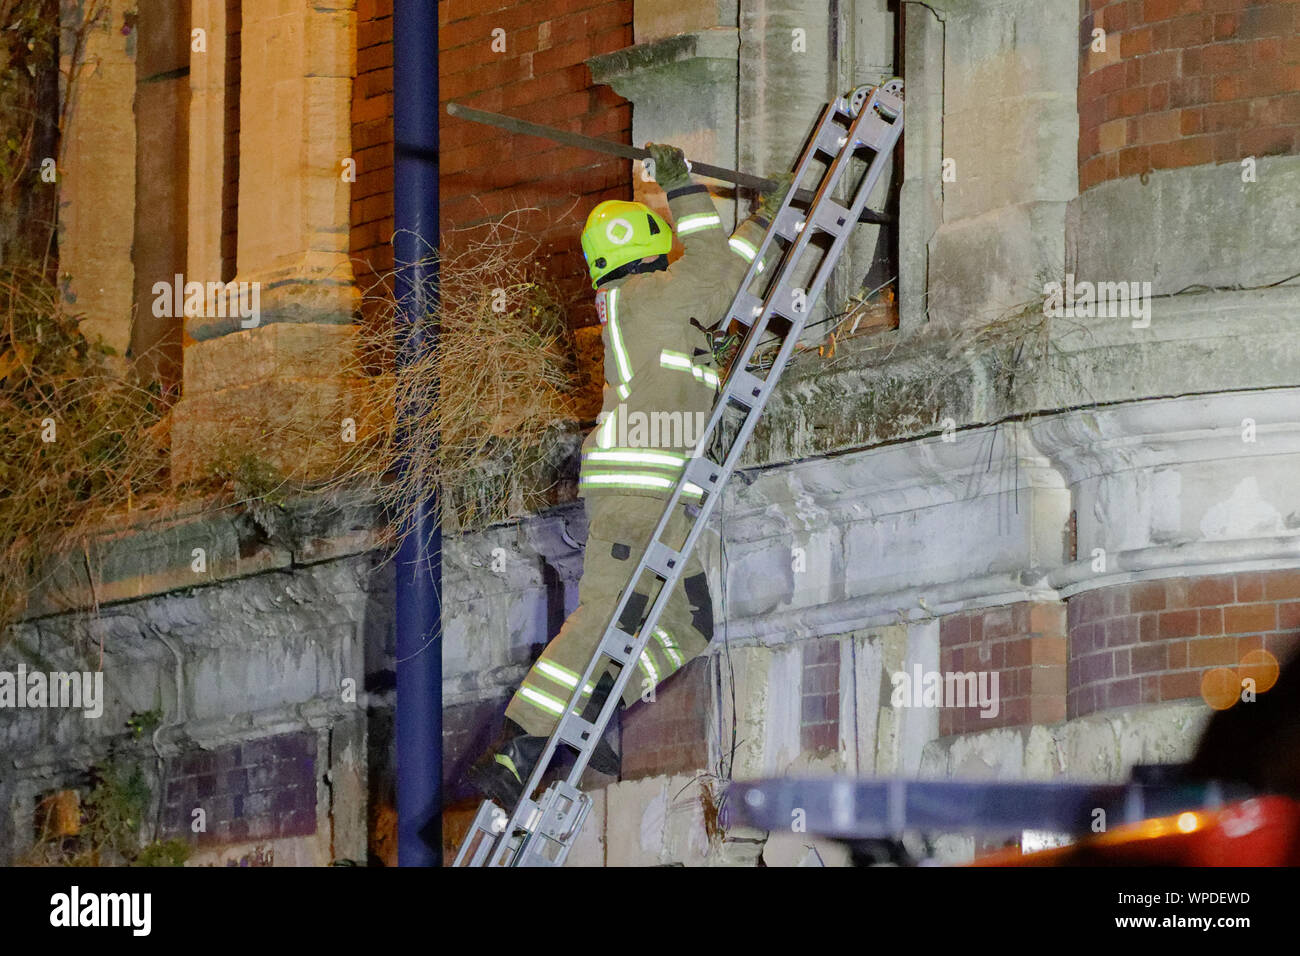 Swansea, UK. 08th Sep, 2019. Pictured: Fire service personnel at the scene. Sunday 08 September 2019 Re: Fire service and police attend a fire at the Palace Theatre, a dilapidated building in the High Street of Swansea, Wales, UK. Credit: ATHENA PICTURE AGENCY LTD/Alamy Live News Stock Photo